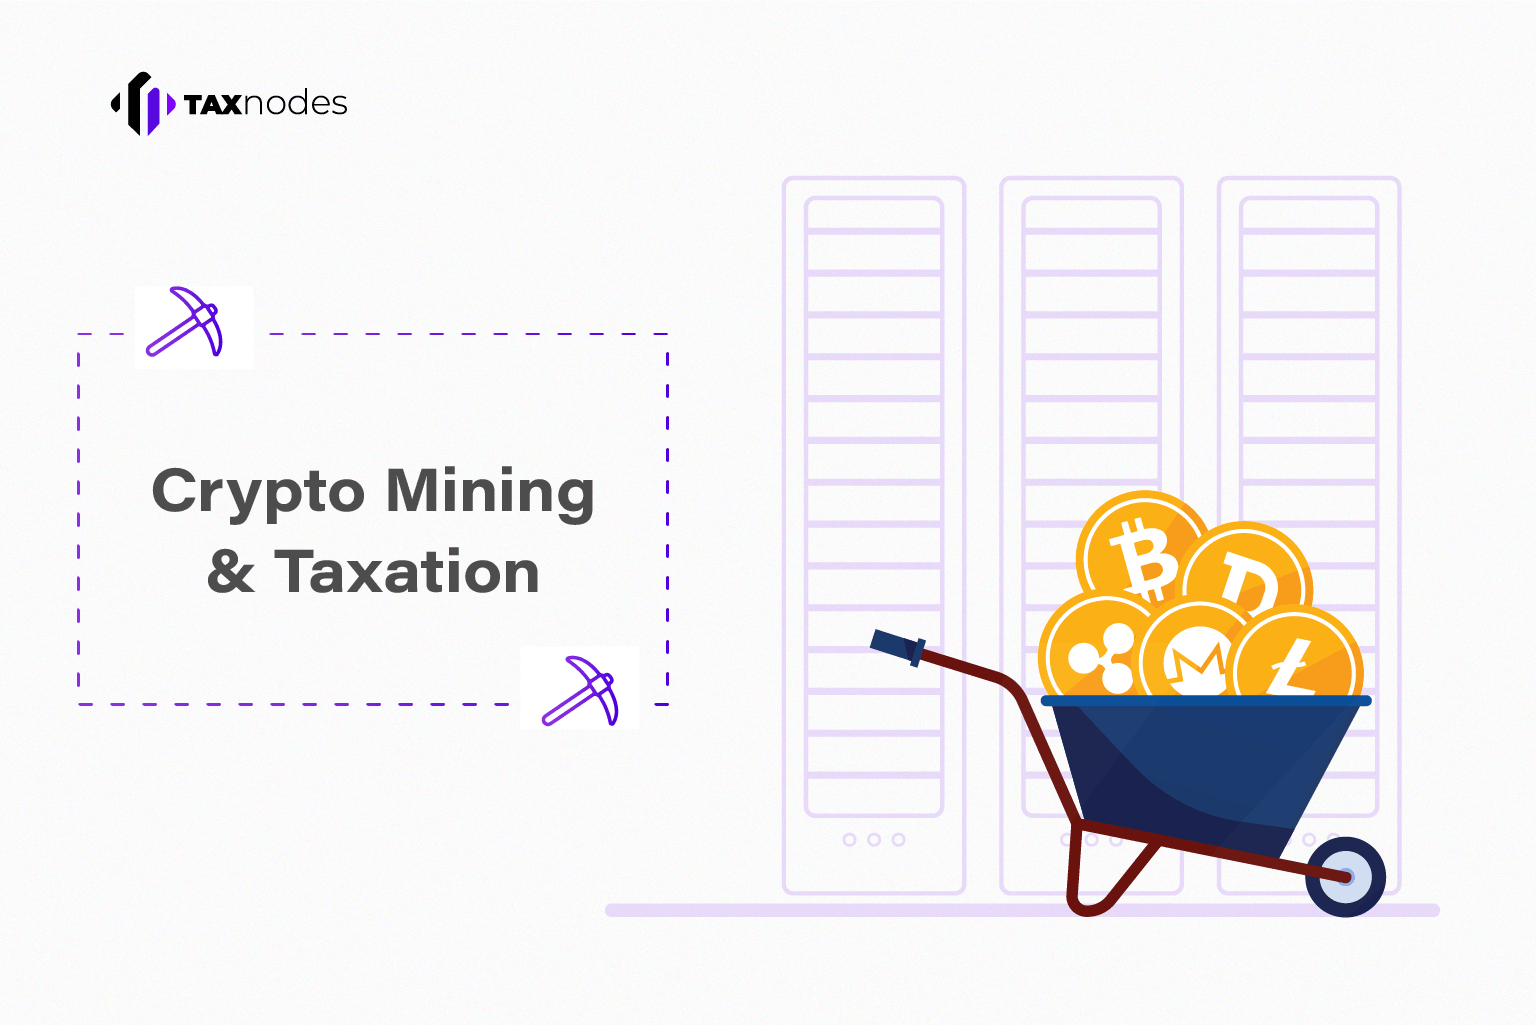 Cryptocurrency mining and taxation